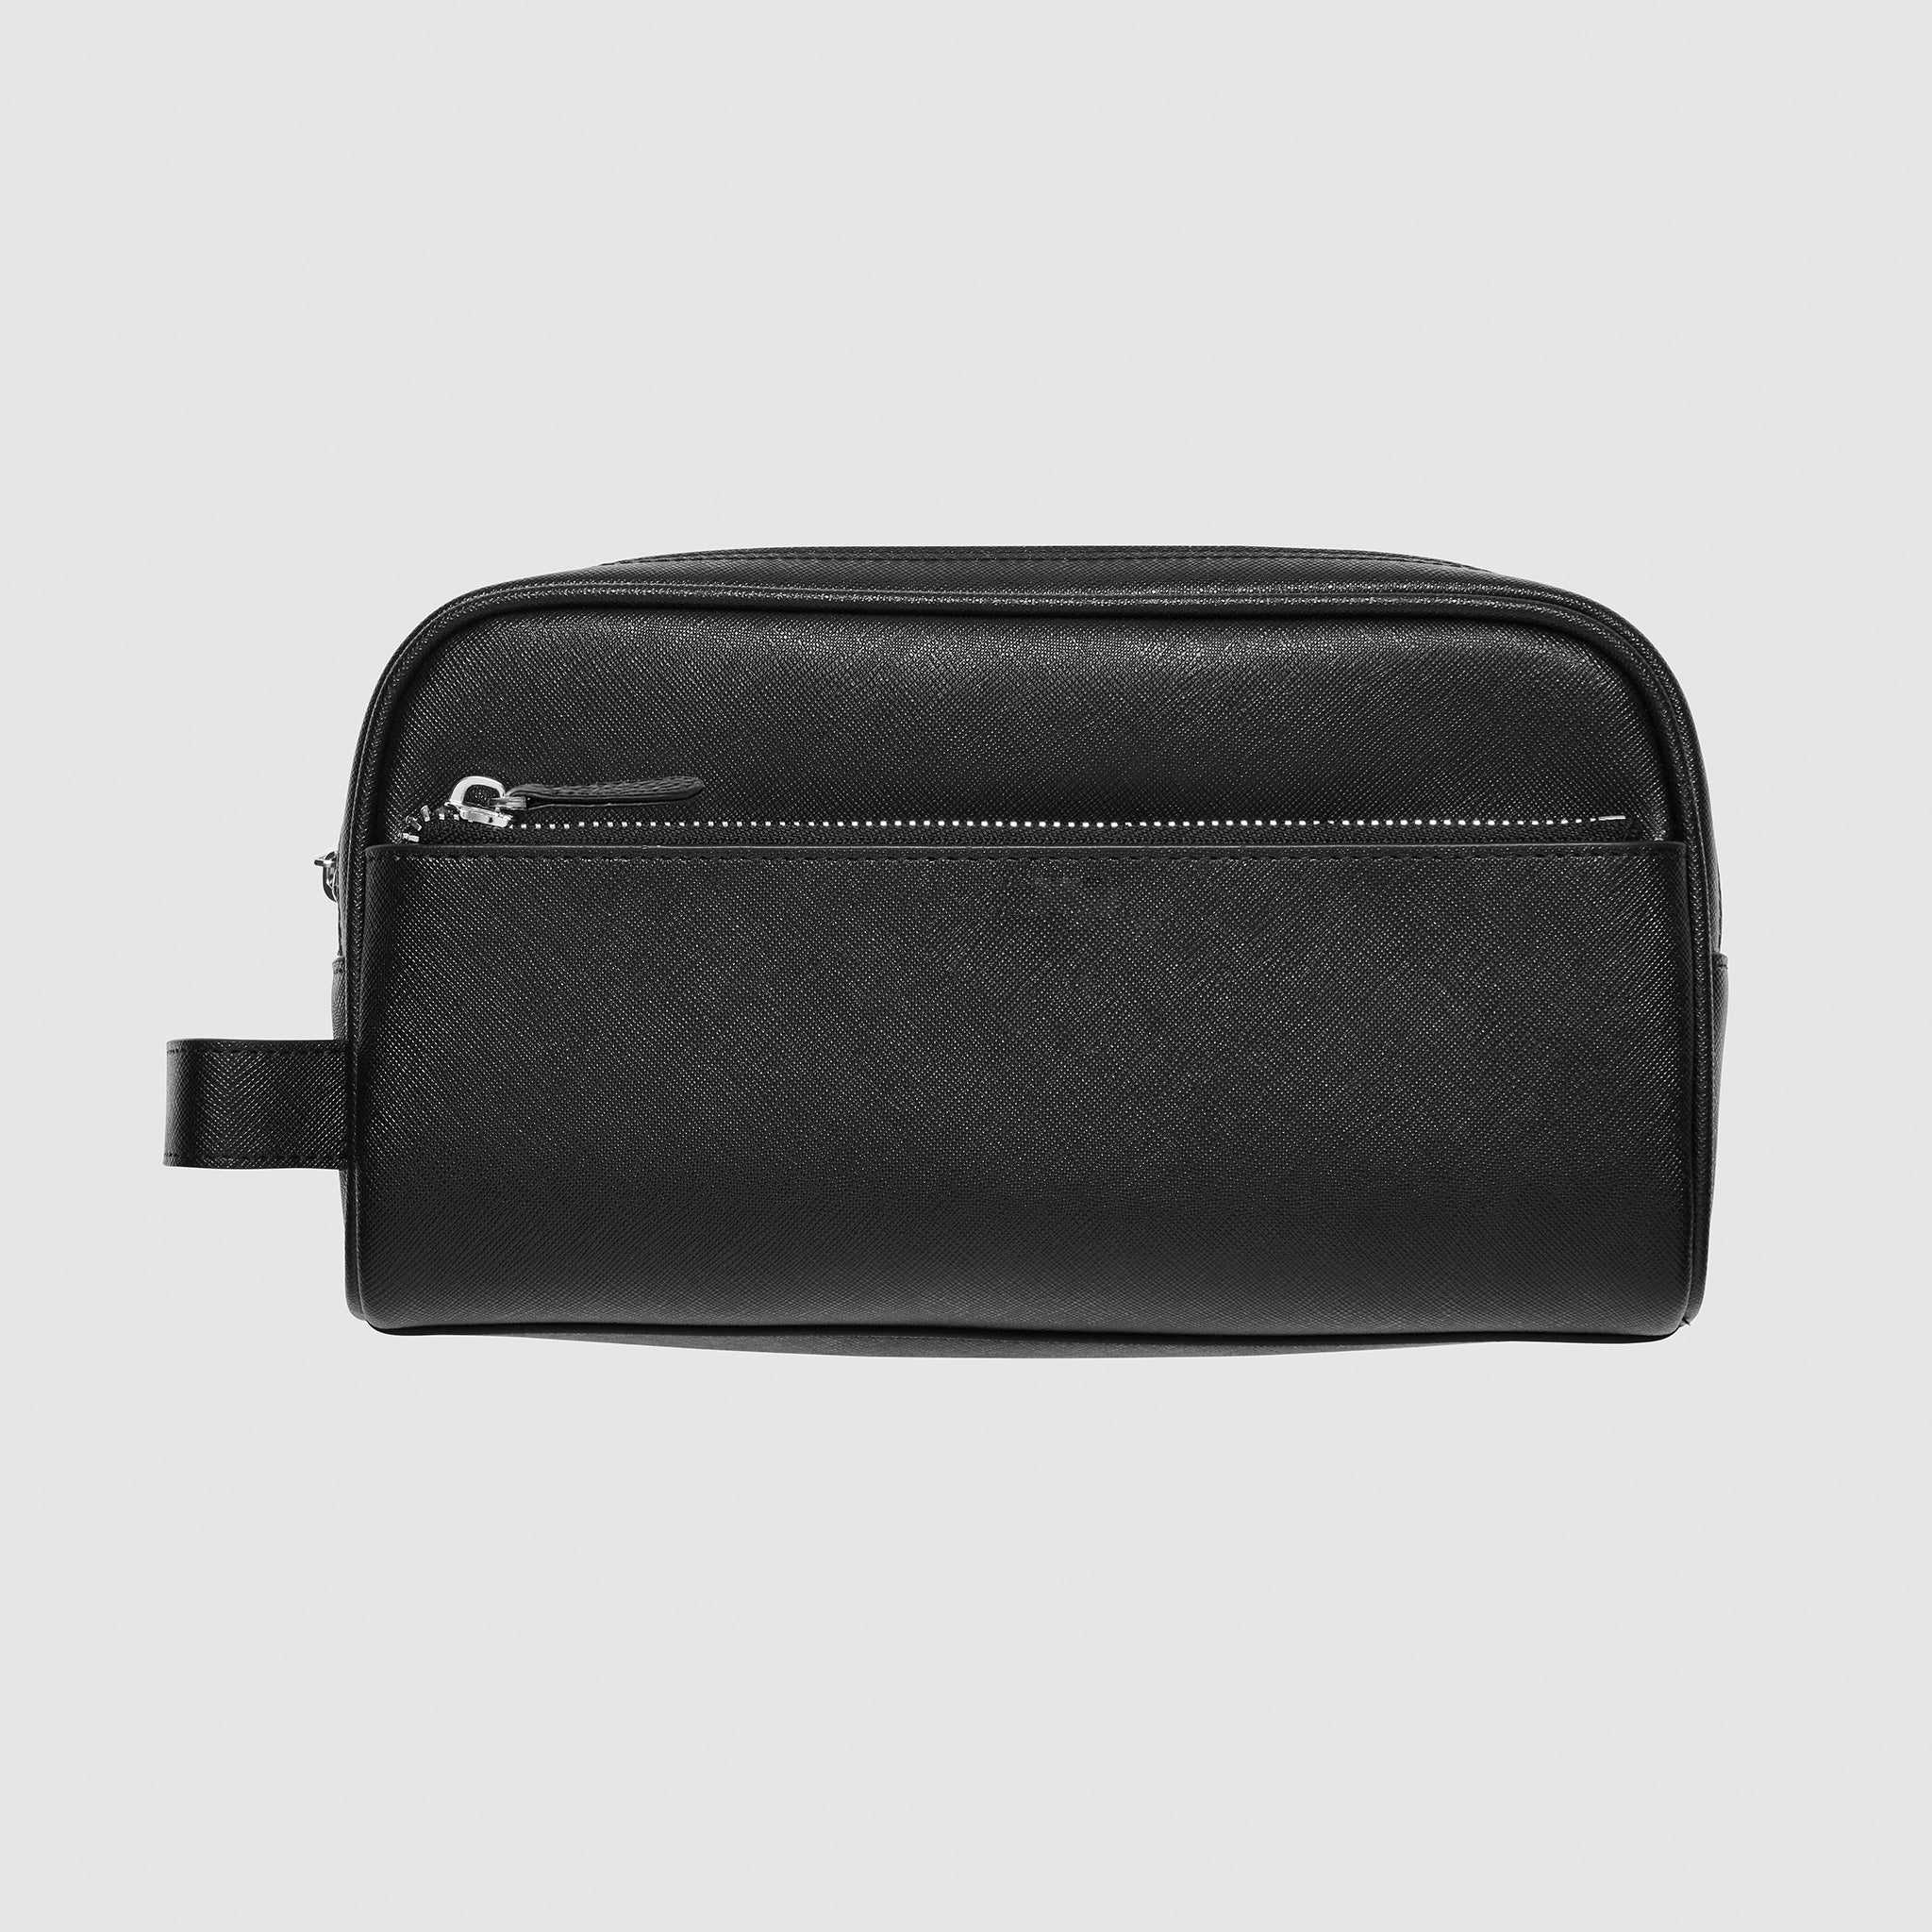 Personalised Wash Bag with Silver Hardware Black Saffiano Leather with ...